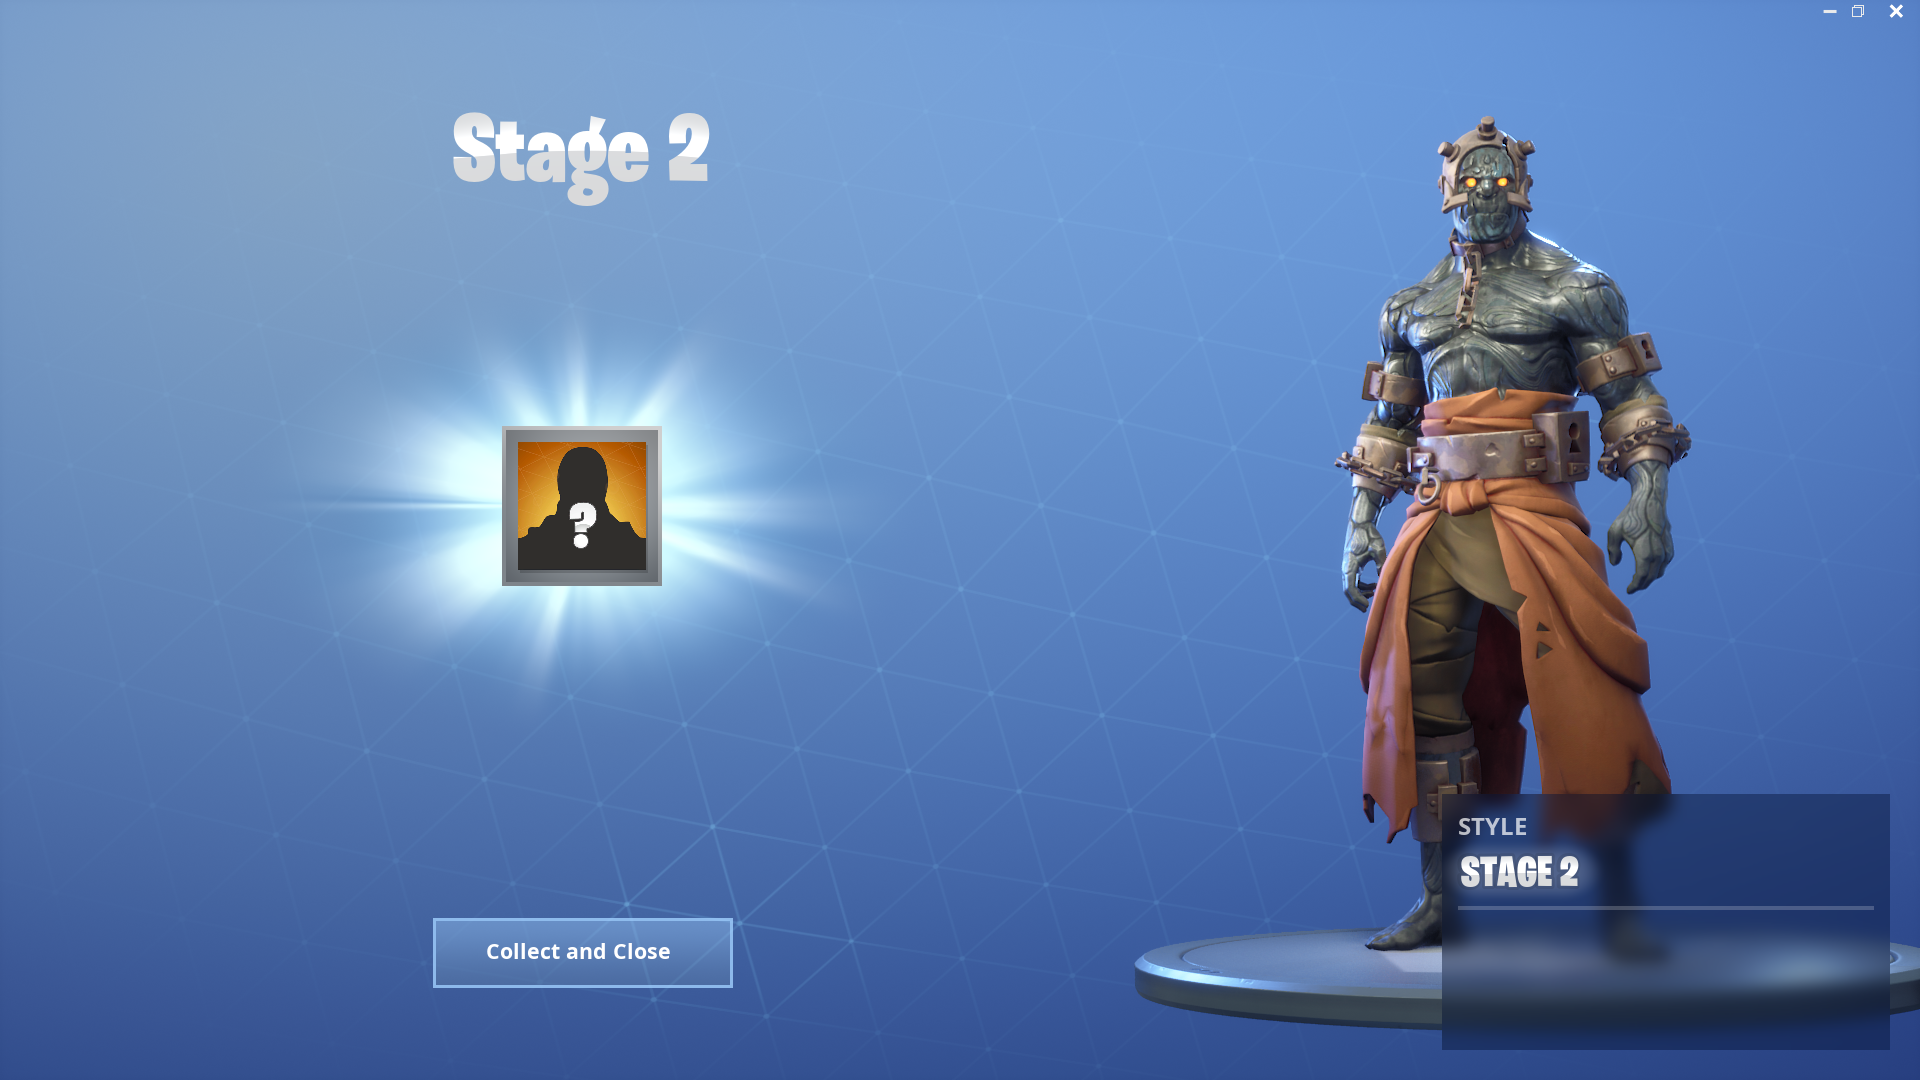 How To Unlock Stage 2 Of The Prisoner Skin In Fortni!   te Battle Royale - how to unlock stage 2 of the prisoner skin in fortnite